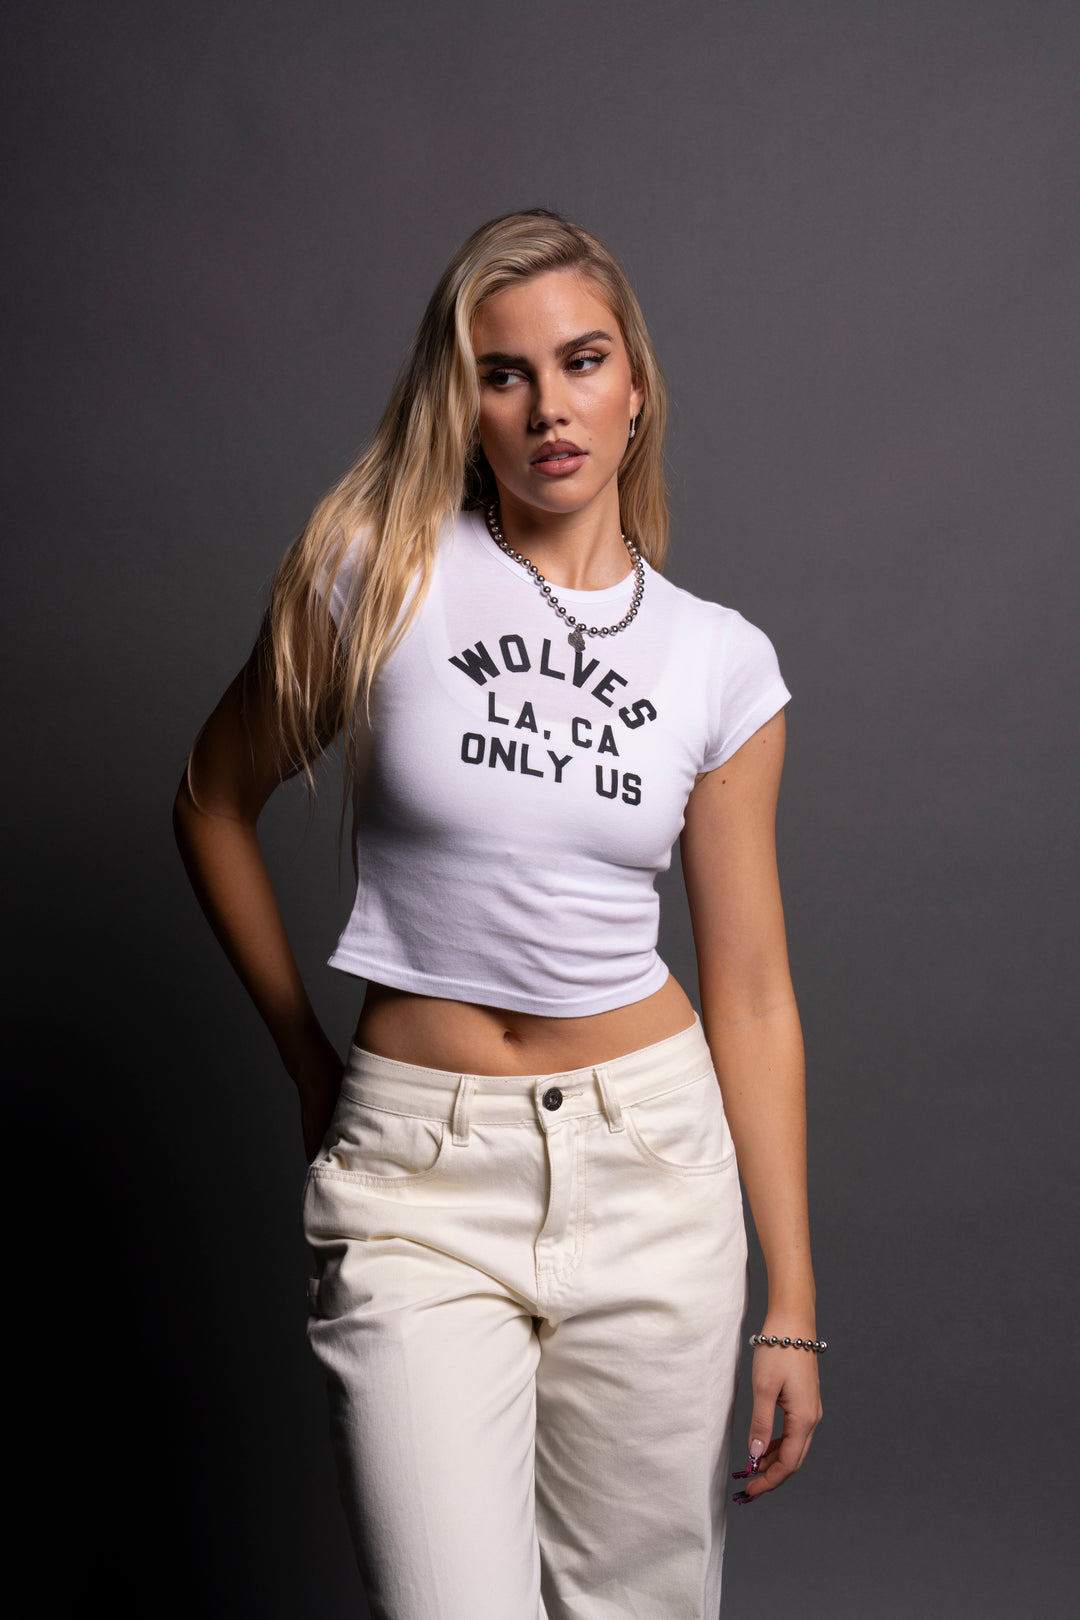 LA Wolves League Baby Tee in White